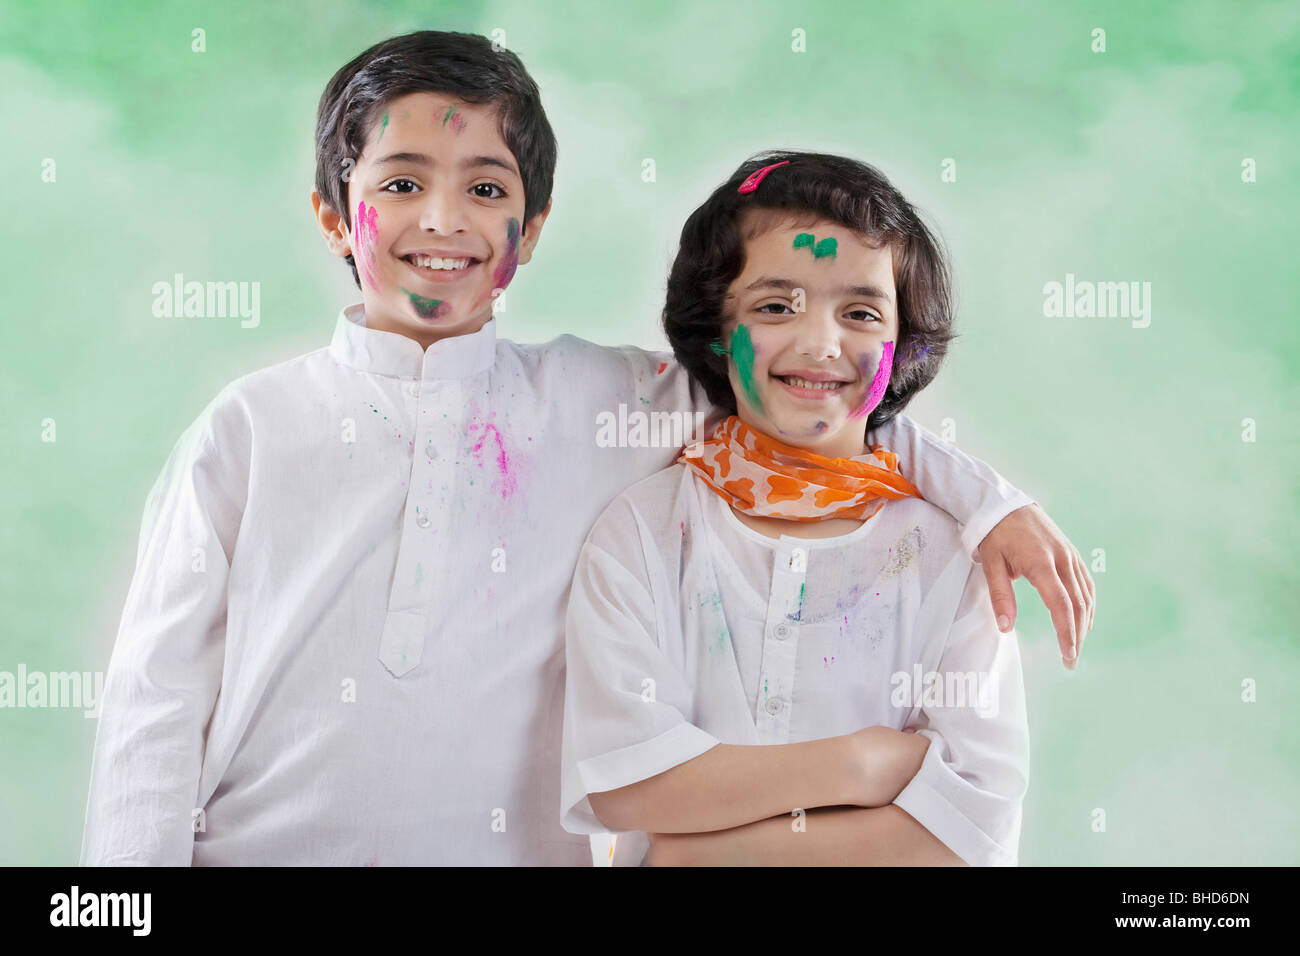 Boy and girl posing together Stock Photo